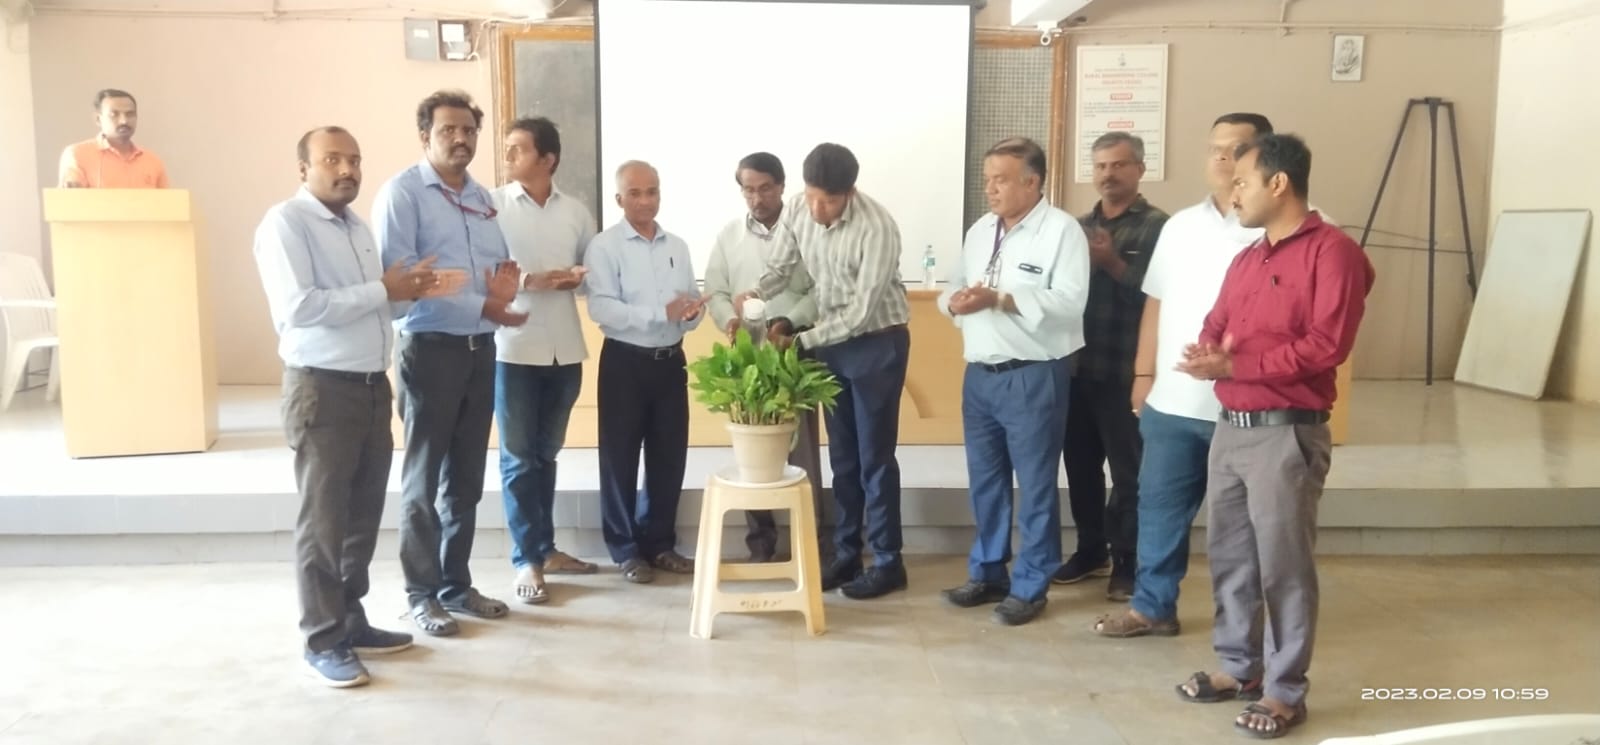 Workshop on “Industry approved COE software’s” was conducted by the Department of Mechanical Engineering, Rural engineering college, Hulkoti on 9th and 10th February 2023.